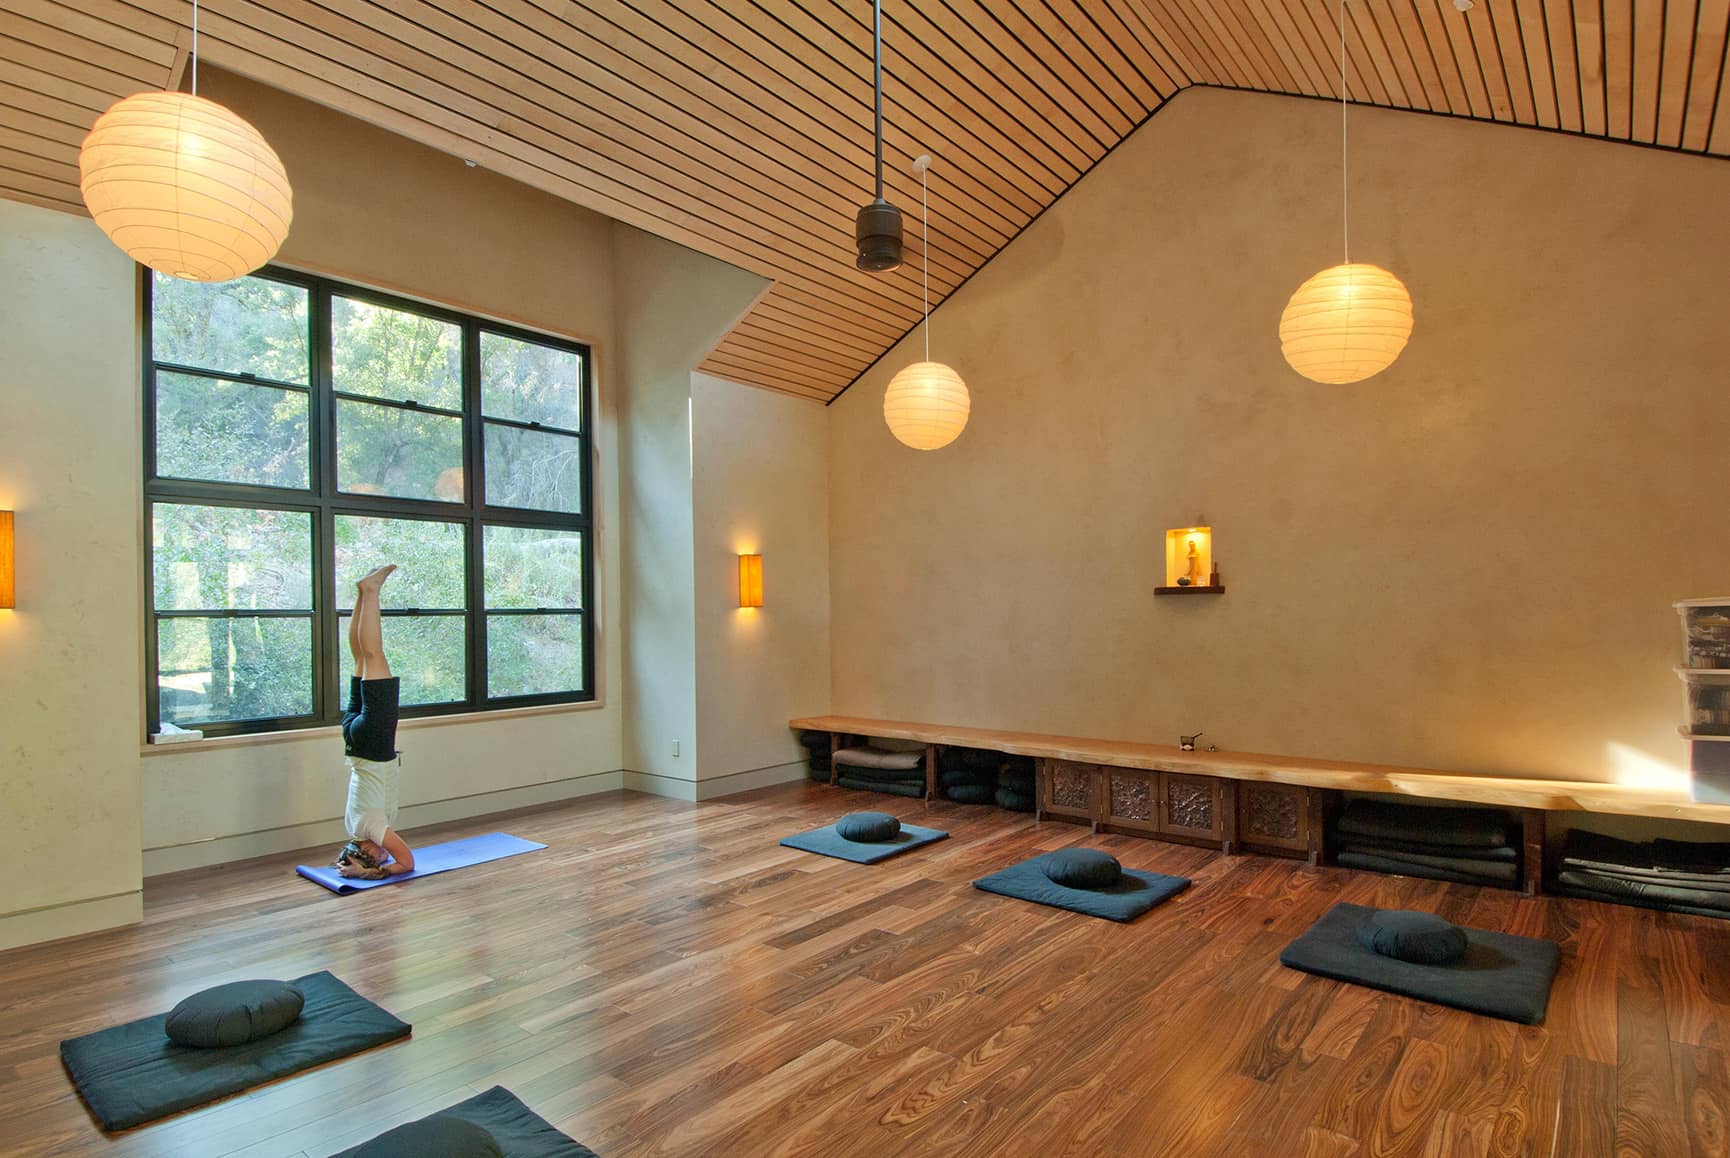 Interior view of newly constructed building used as a yoga retreat with light streaming in.